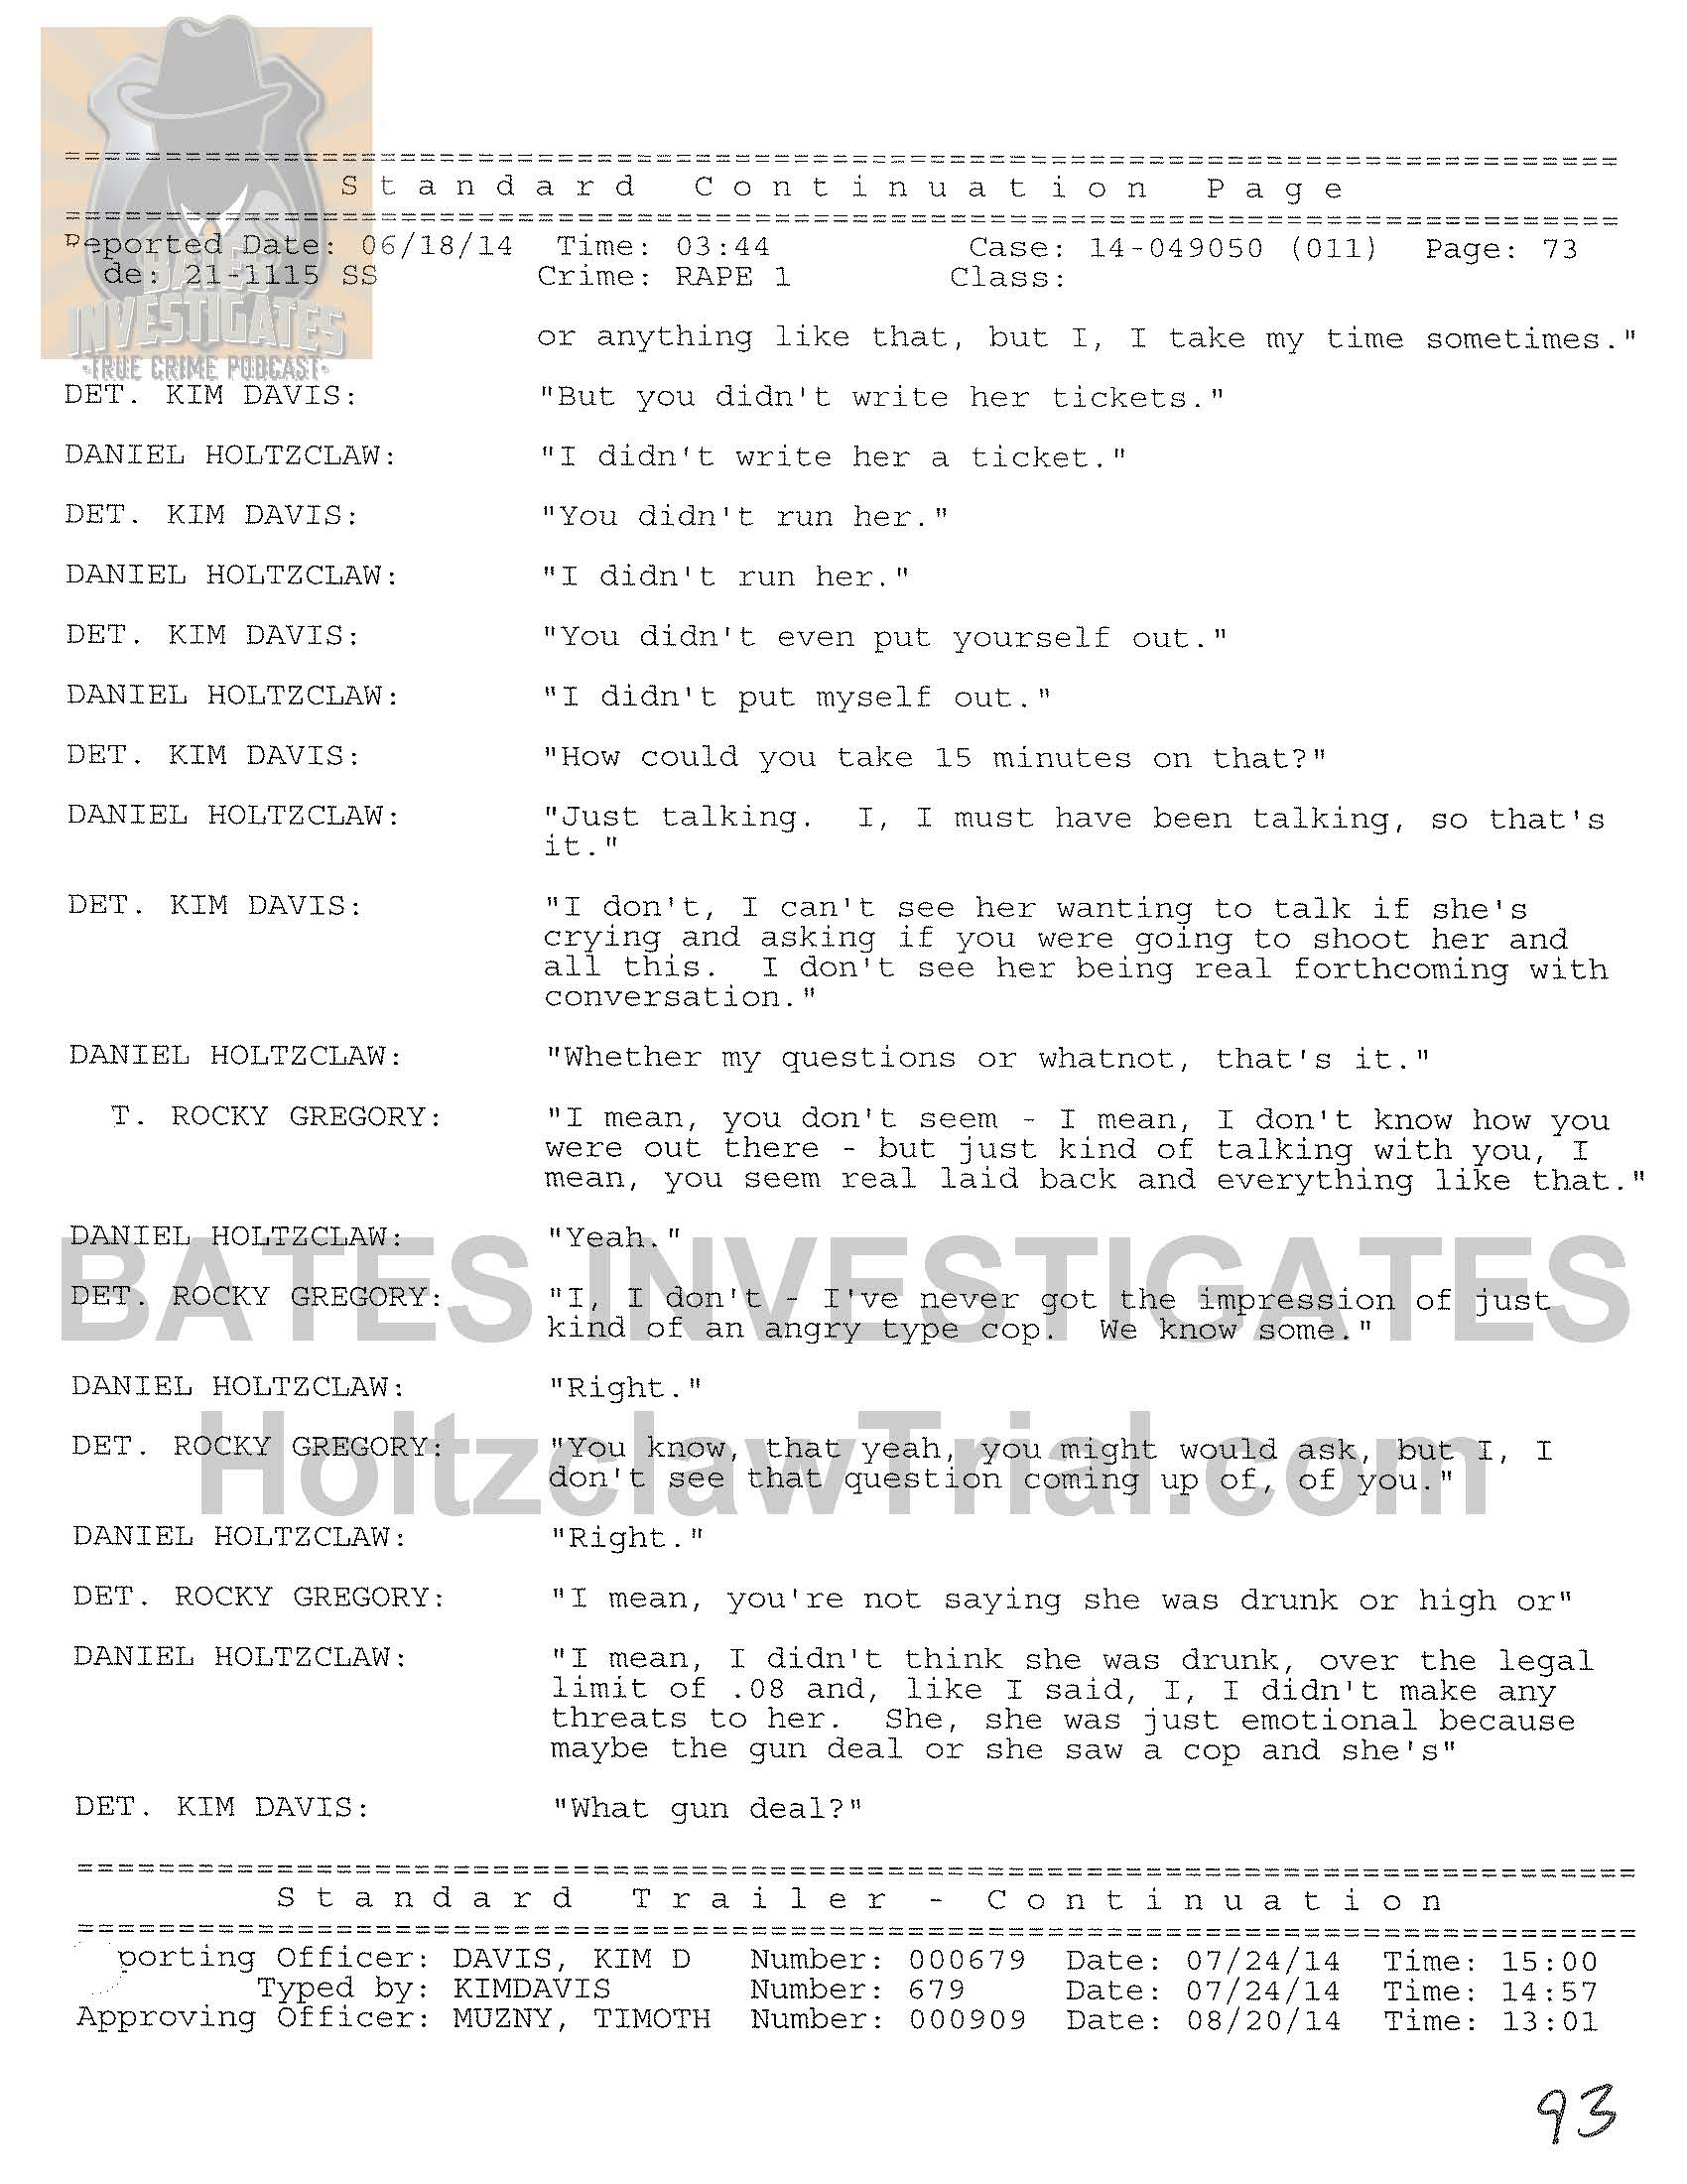 Holtzclaw Interrogation Transcript - Ep02 Redacted_Page_73.jpg